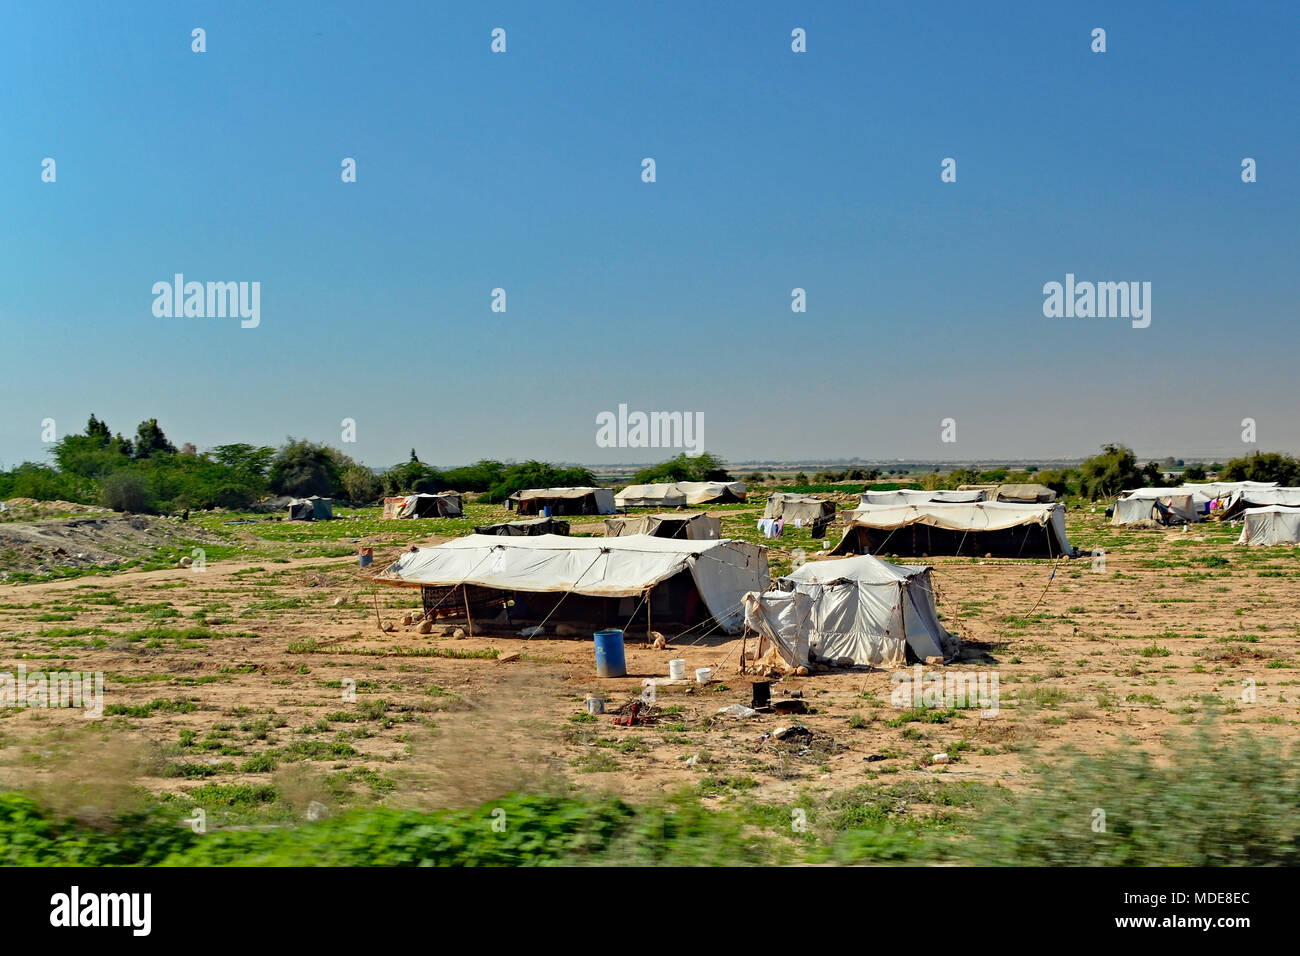 Palestinian refugee camp in Jordan near the border with Israel. Stock Photo